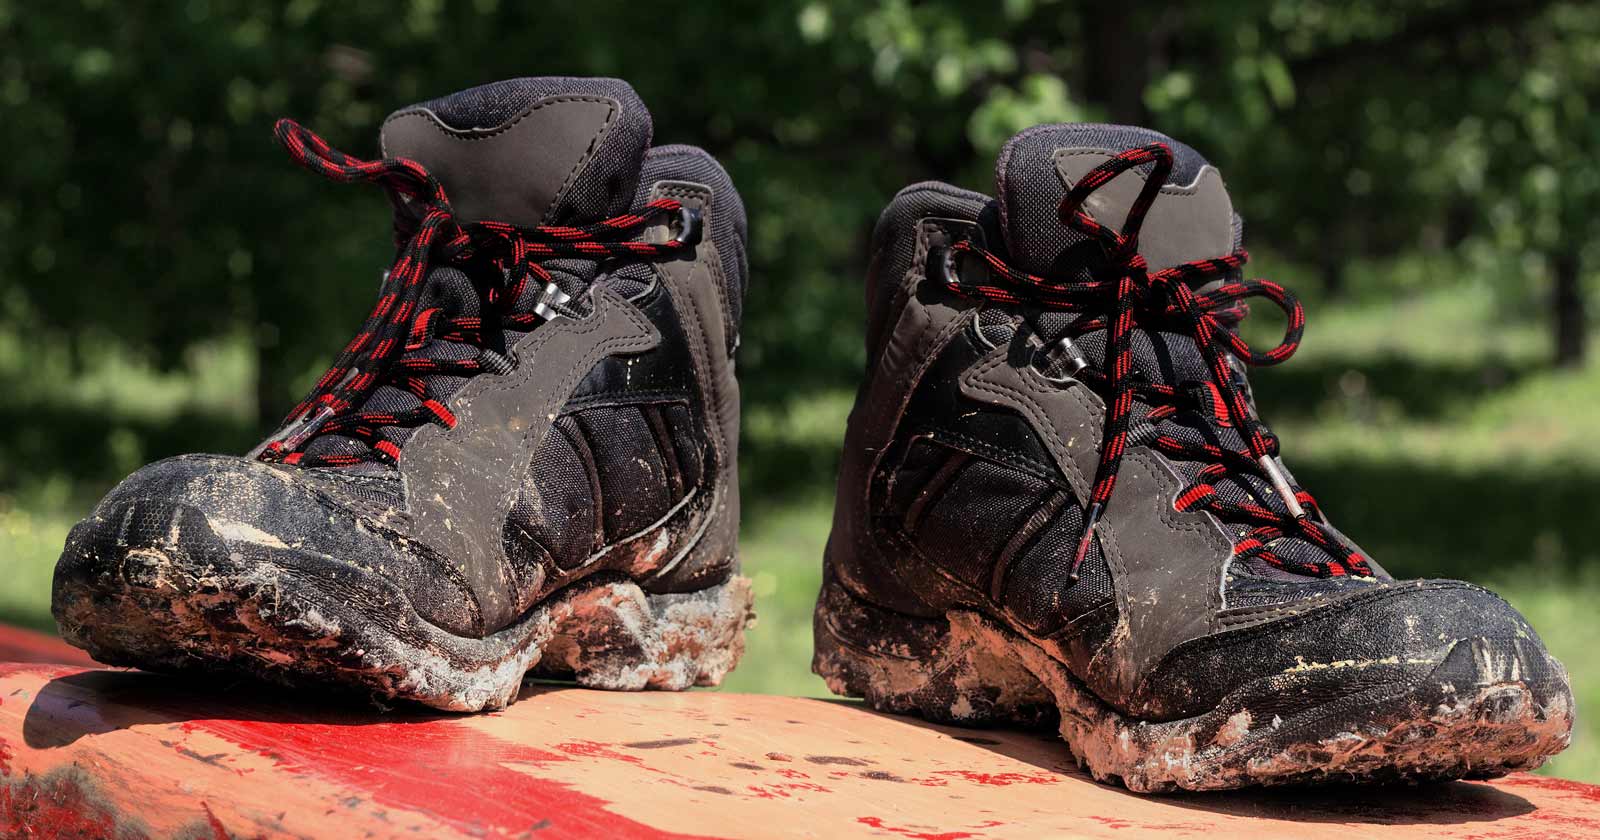 How long do hiking boots last